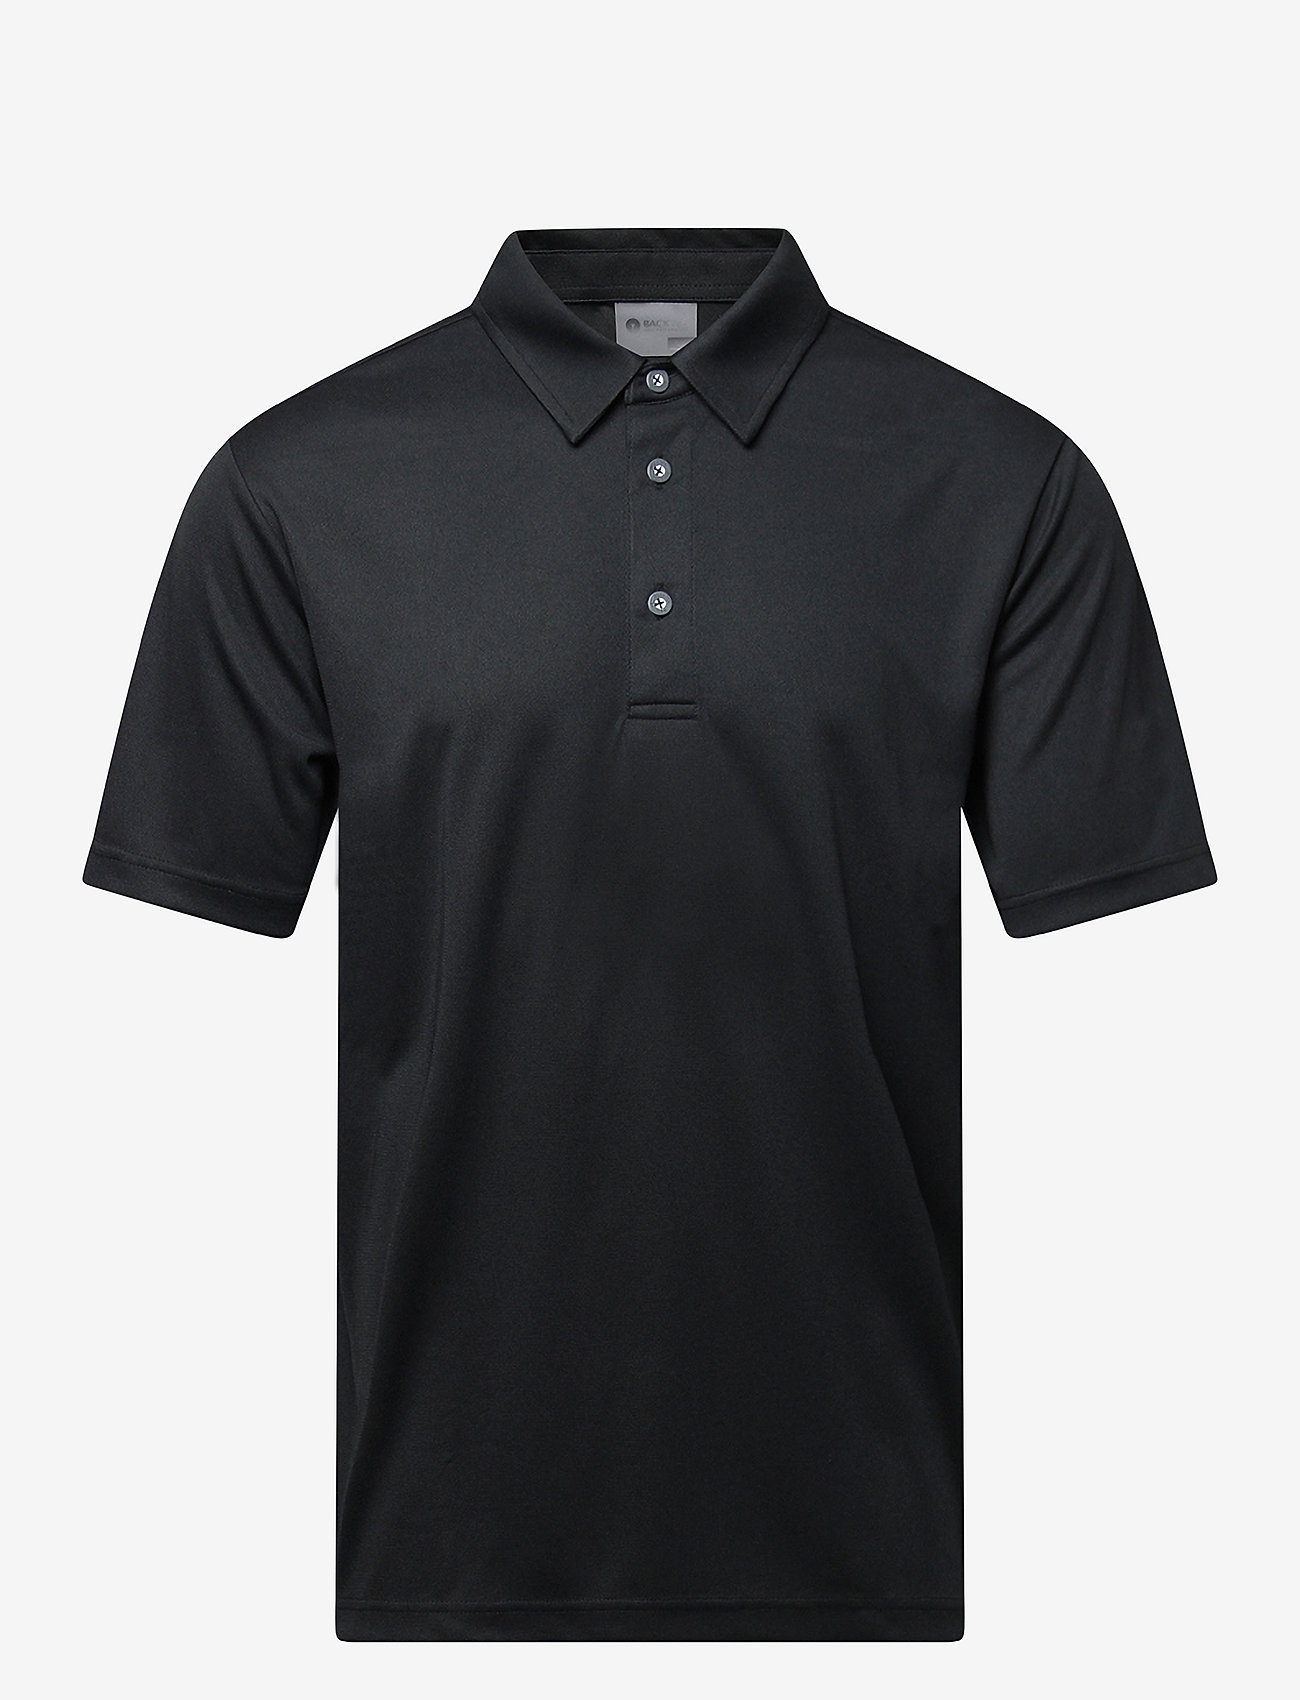 BACKTEE - Mens Performance Polo - oberteile & t-shirts - black - 1